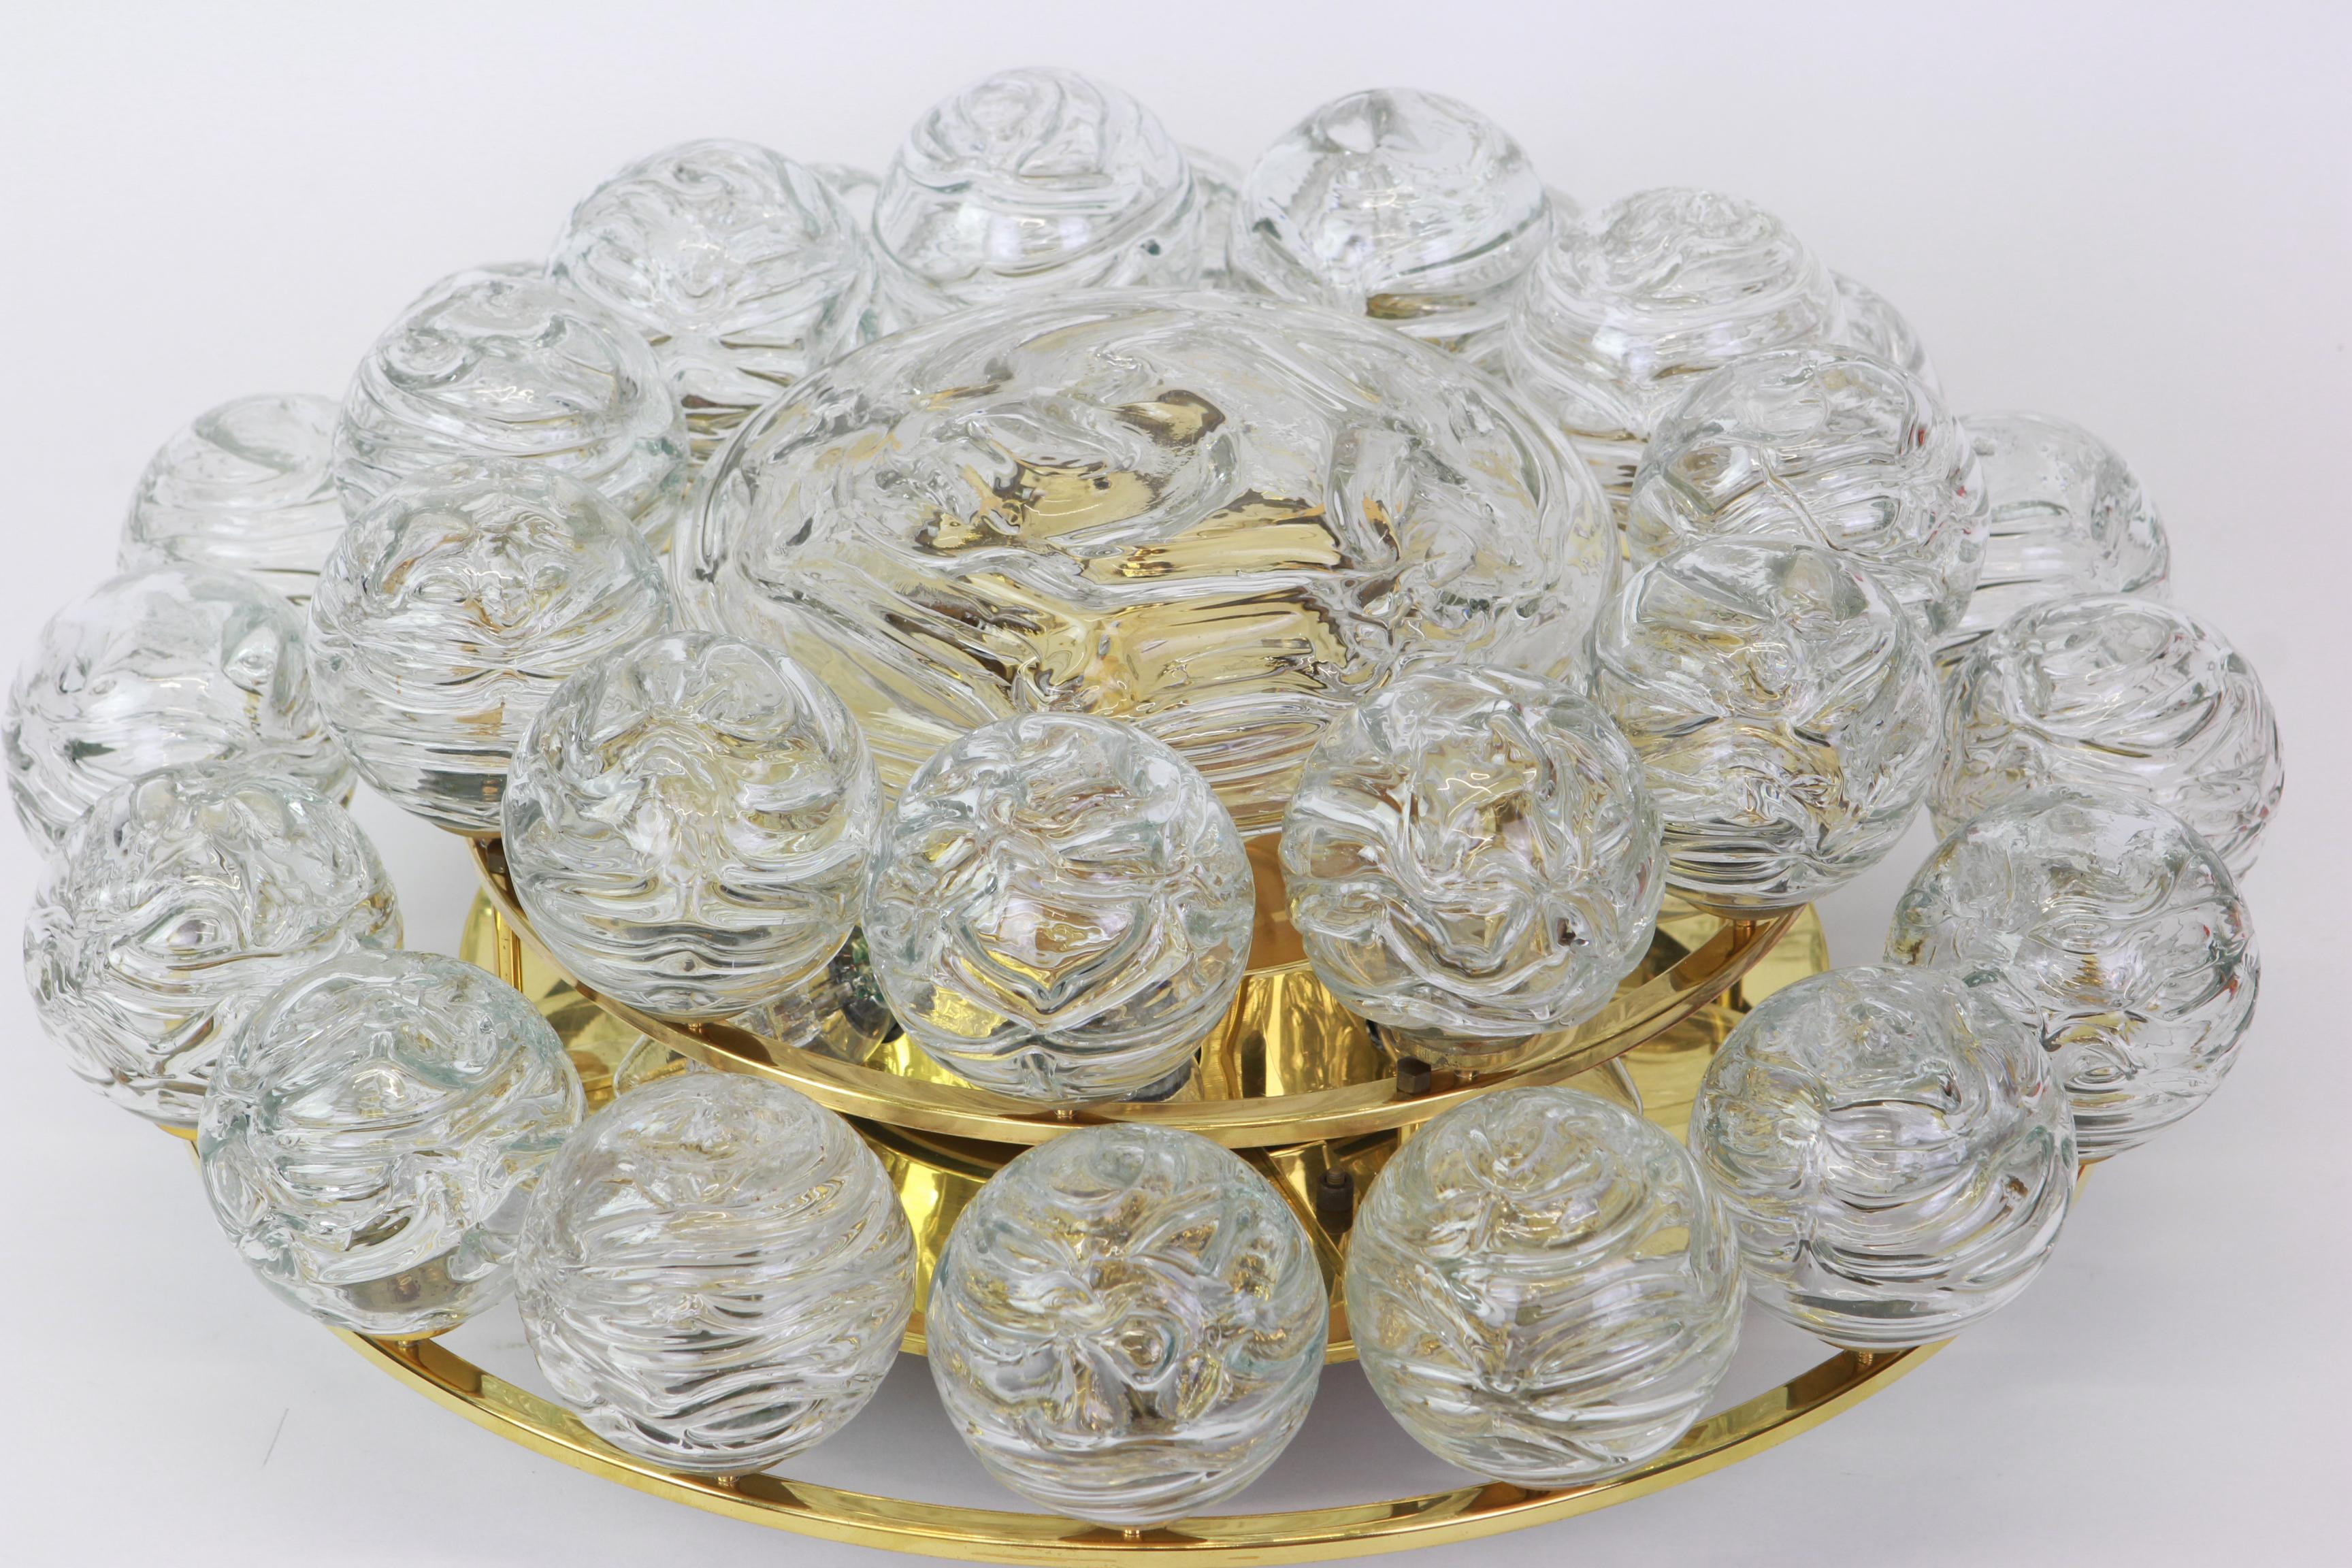 Spectacular Sputnik flush mount with glass snowballs designed by Doria, Germany, 1970s
All glass balls are in very good condition.

Heavy quality and in very good condition. Cleaned, well-wired and ready to use. 
It requires 8 x E14 small bulbs